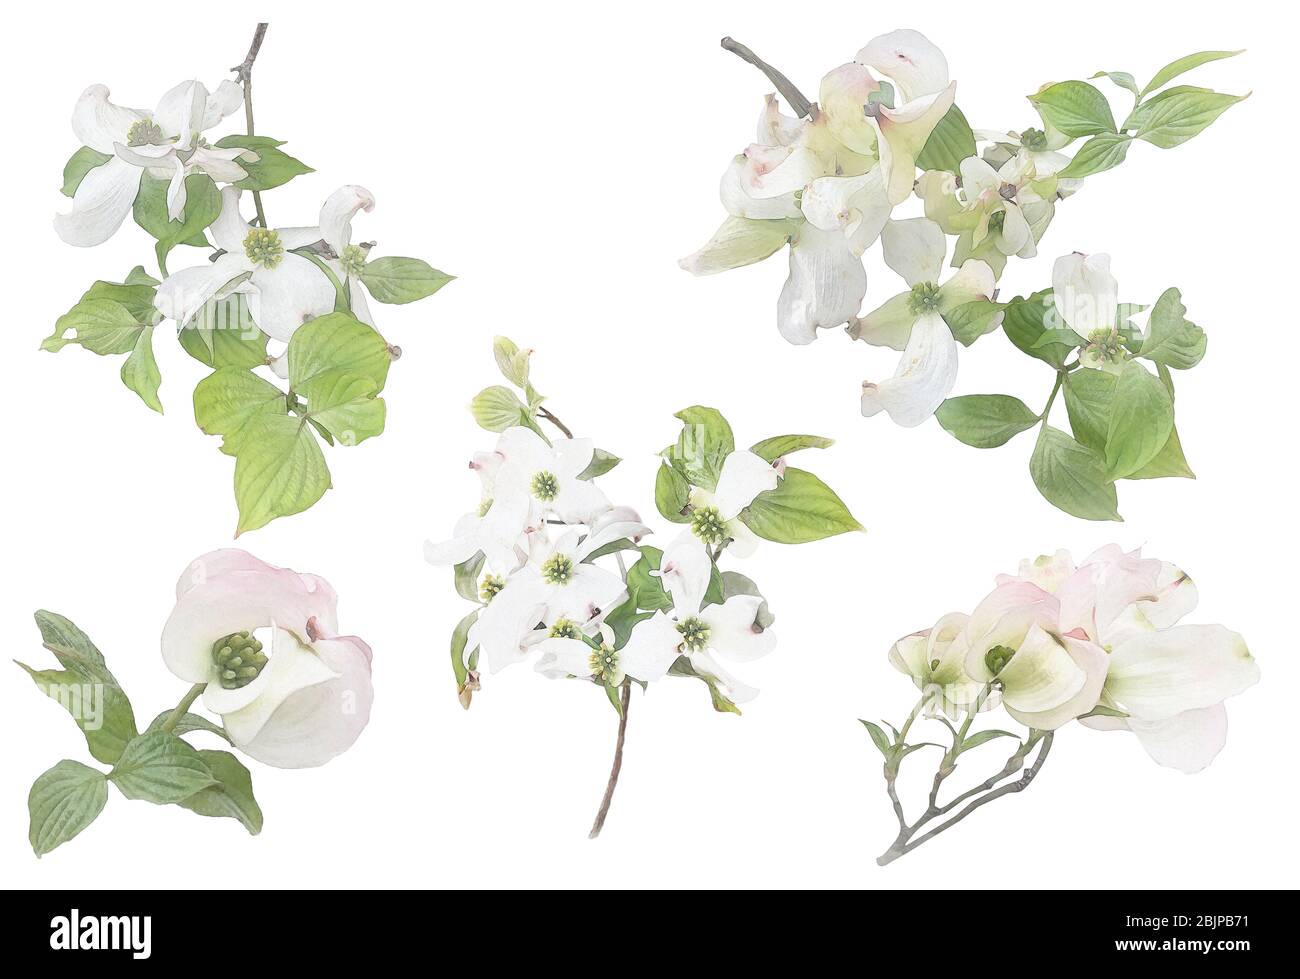 White flowering dogwood on branch watercolor illustration effect infrared set, photo manipulation, wedding invitation floral graphic design element on Stock Photo